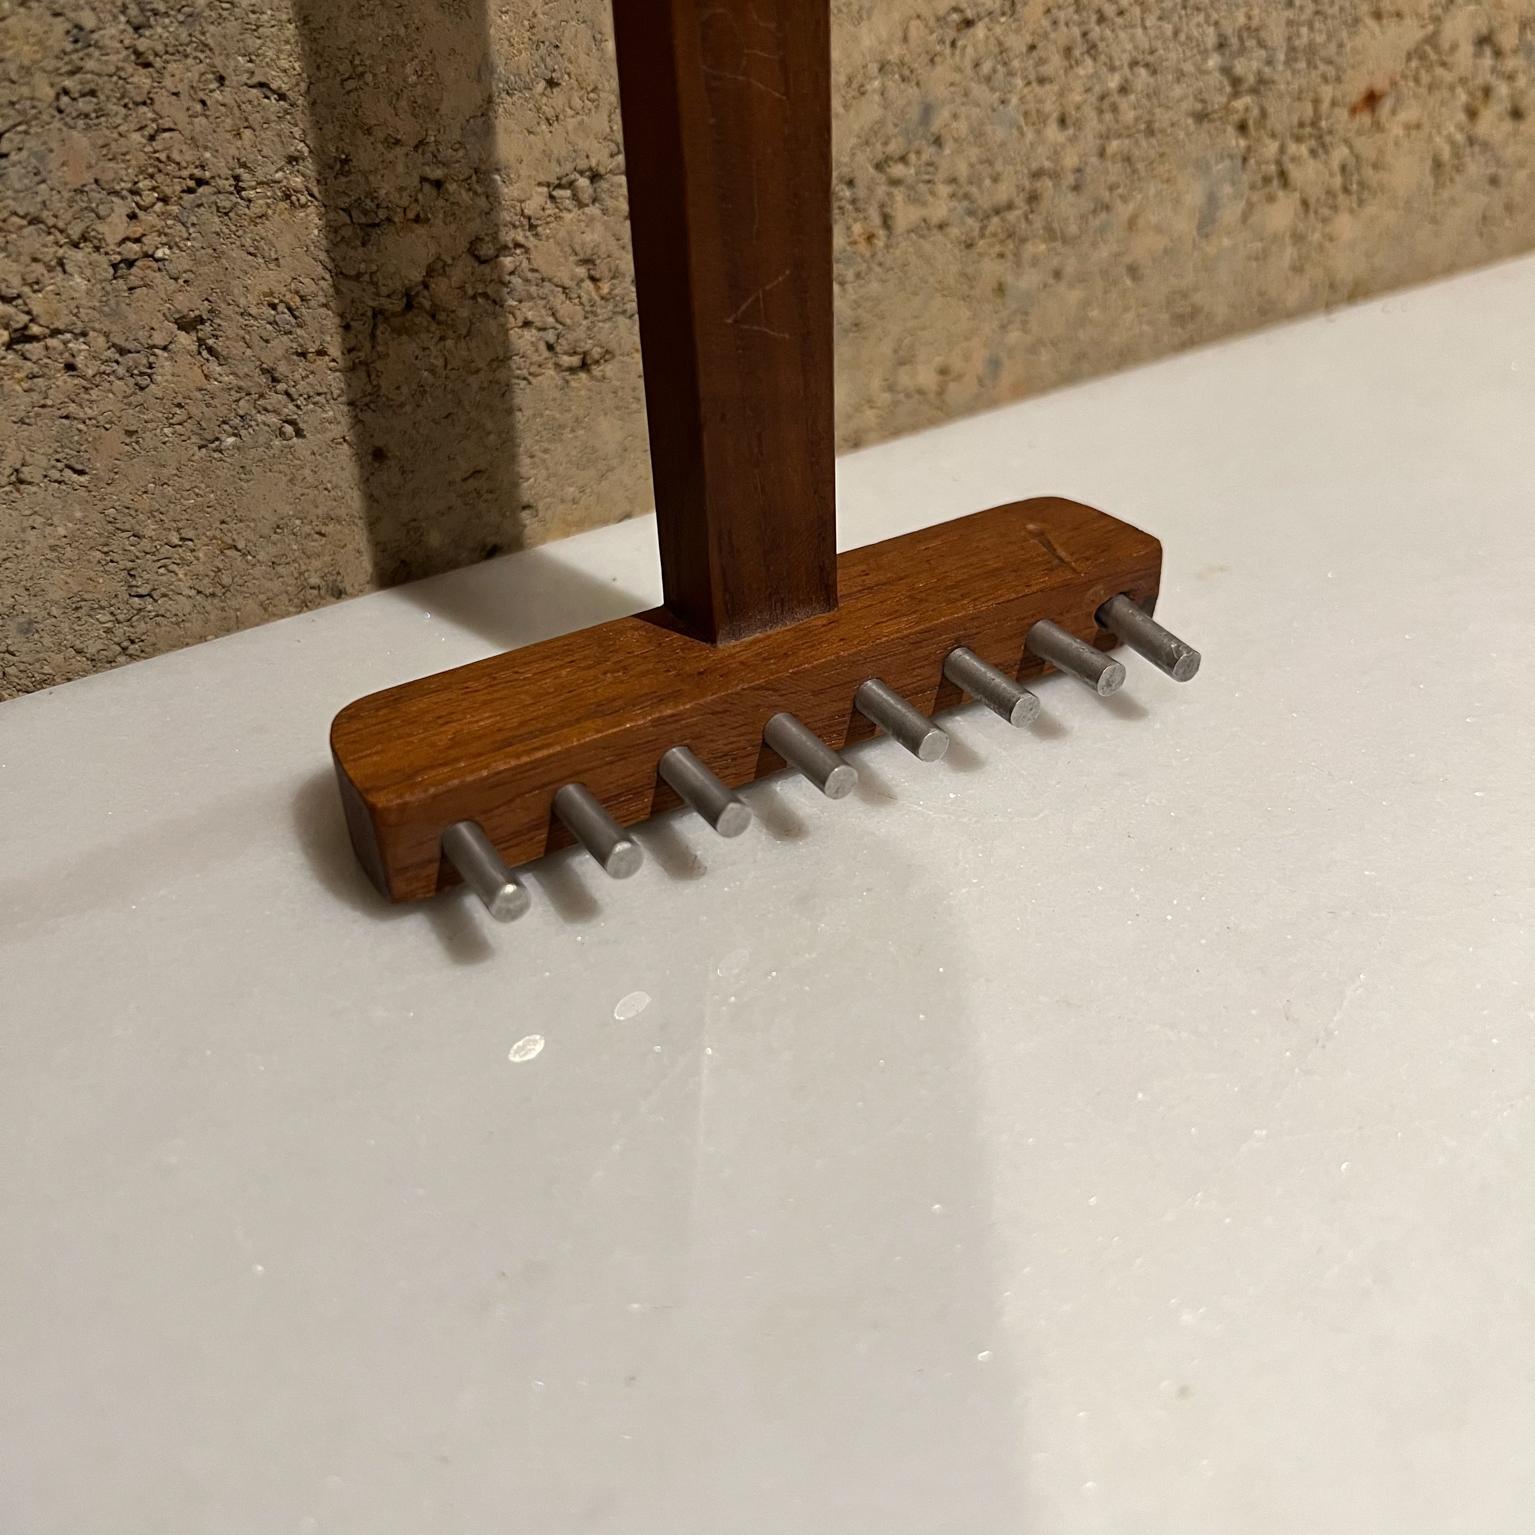 1960s Modern Danish Vintage rake tool grate in teakwood with aluminum 
22.25 T x 4 W x 1.25 D
Preowned original vintage condition with imperfections.
See images provided please.